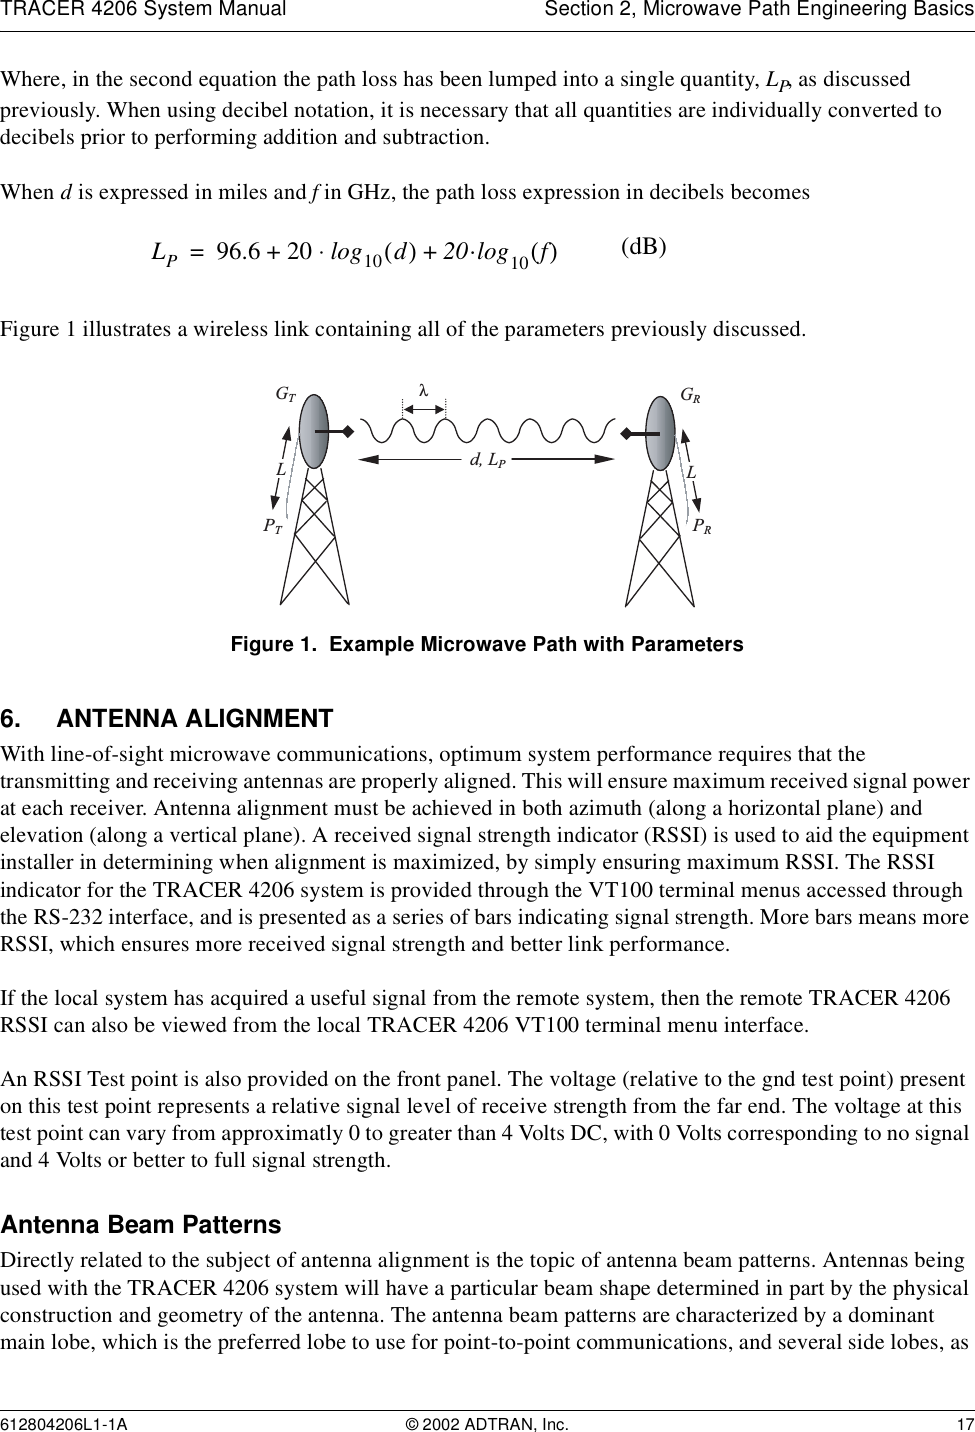 TRACER 4206 System Manual Section 2, Microwave Path Engineering Basics612804206L1-1A © 2002 ADTRAN, Inc. 17Where, in the second equation the path loss has been lumped into a single quantity, LP, as discussed previously. When using decibel notation, it is necessary that all quantities are individually converted to decibels prior to performing addition and subtraction.When d is expressed in miles and f in GHz, the path loss expression in decibels becomesFigure 1 illustrates a wireless link containing all of the parameters previously discussed.Figure 1.  Example Microwave Path with Parameters6. ANTENNA ALIGNMENTWith line-of-sight microwave communications, optimum system performance requires that the transmitting and receiving antennas are properly aligned. This will ensure maximum received signal power at each receiver. Antenna alignment must be achieved in both azimuth (along a horizontal plane) and elevation (along a vertical plane). A received signal strength indicator (RSSI) is used to aid the equipment installer in determining when alignment is maximized, by simply ensuring maximum RSSI. The RSSI indicator for the TRACER 4206 system is provided through the VT100 terminal menus accessed through the RS-232 interface, and is presented as a series of bars indicating signal strength. More bars means more RSSI, which ensures more received signal strength and better link performance.If the local system has acquired a useful signal from the remote system, then the remote TRACER 4206 RSSI can also be viewed from the local TRACER 4206 VT100 terminal menu interface.An RSSI Test point is also provided on the front panel. The voltage (relative to the gnd test point) present on this test point represents a relative signal level of receive strength from the far end. The voltage at this test point can vary from approximatly 0 to greater than 4 Volts DC, with 0 Volts corresponding to no signal and 4 Volts or better to full signal strength.Antenna Beam PatternsDirectly related to the subject of antenna alignment is the topic of antenna beam patterns. Antennas being used with the TRACER 4206 system will have a particular beam shape determined in part by the physical construction and geometry of the antenna. The antenna beam patterns are characterized by a dominant main lobe, which is the preferred lobe to use for point-to-point communications, and several side lobes, as LP96.6 20 log10 d() 20·log+10 f()⋅+= (dB) GTGRd, LPPTPRλLL